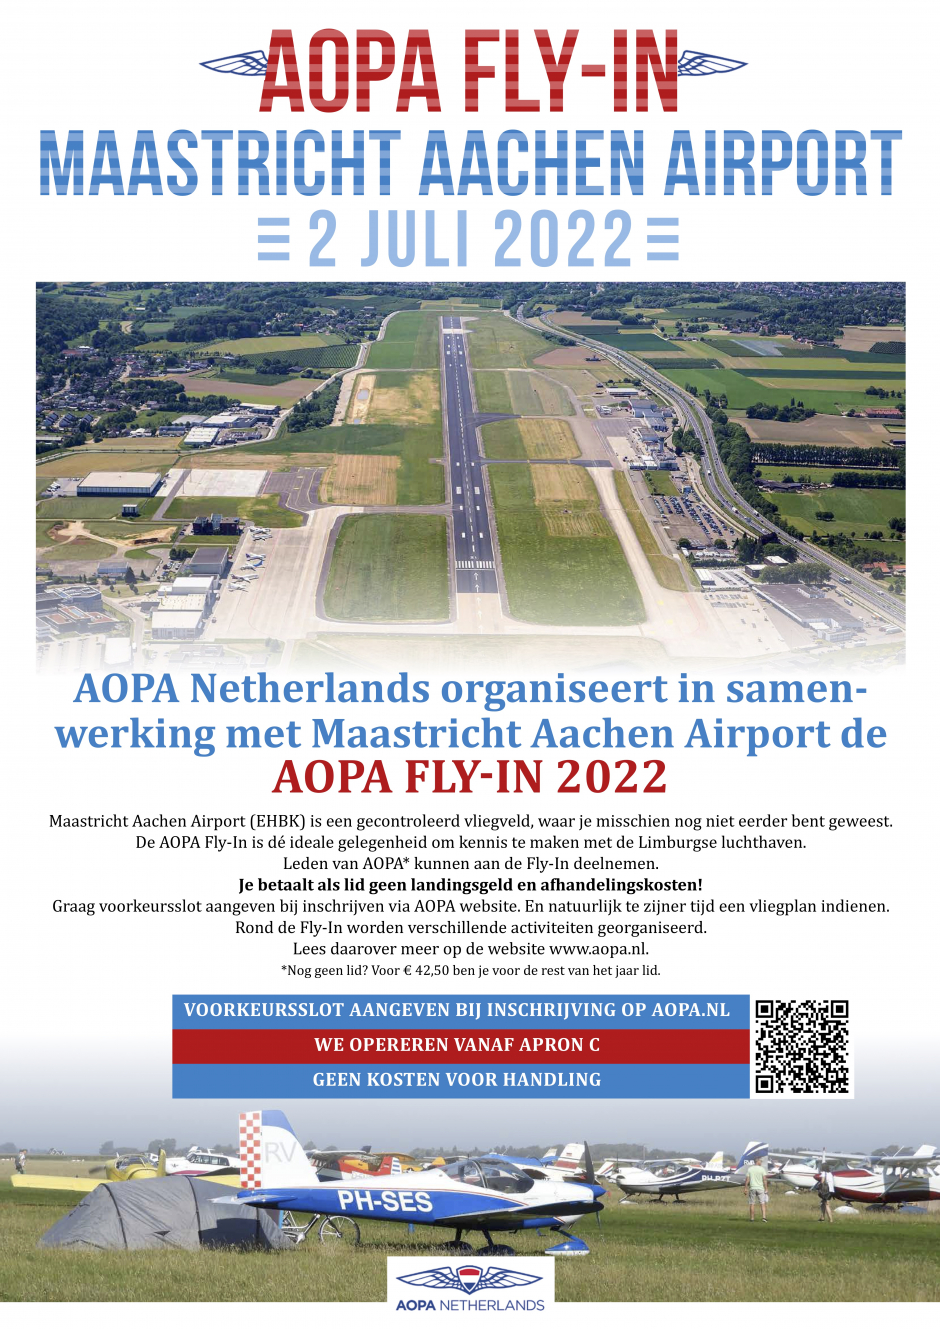 AOPA Fly In 2022 poster